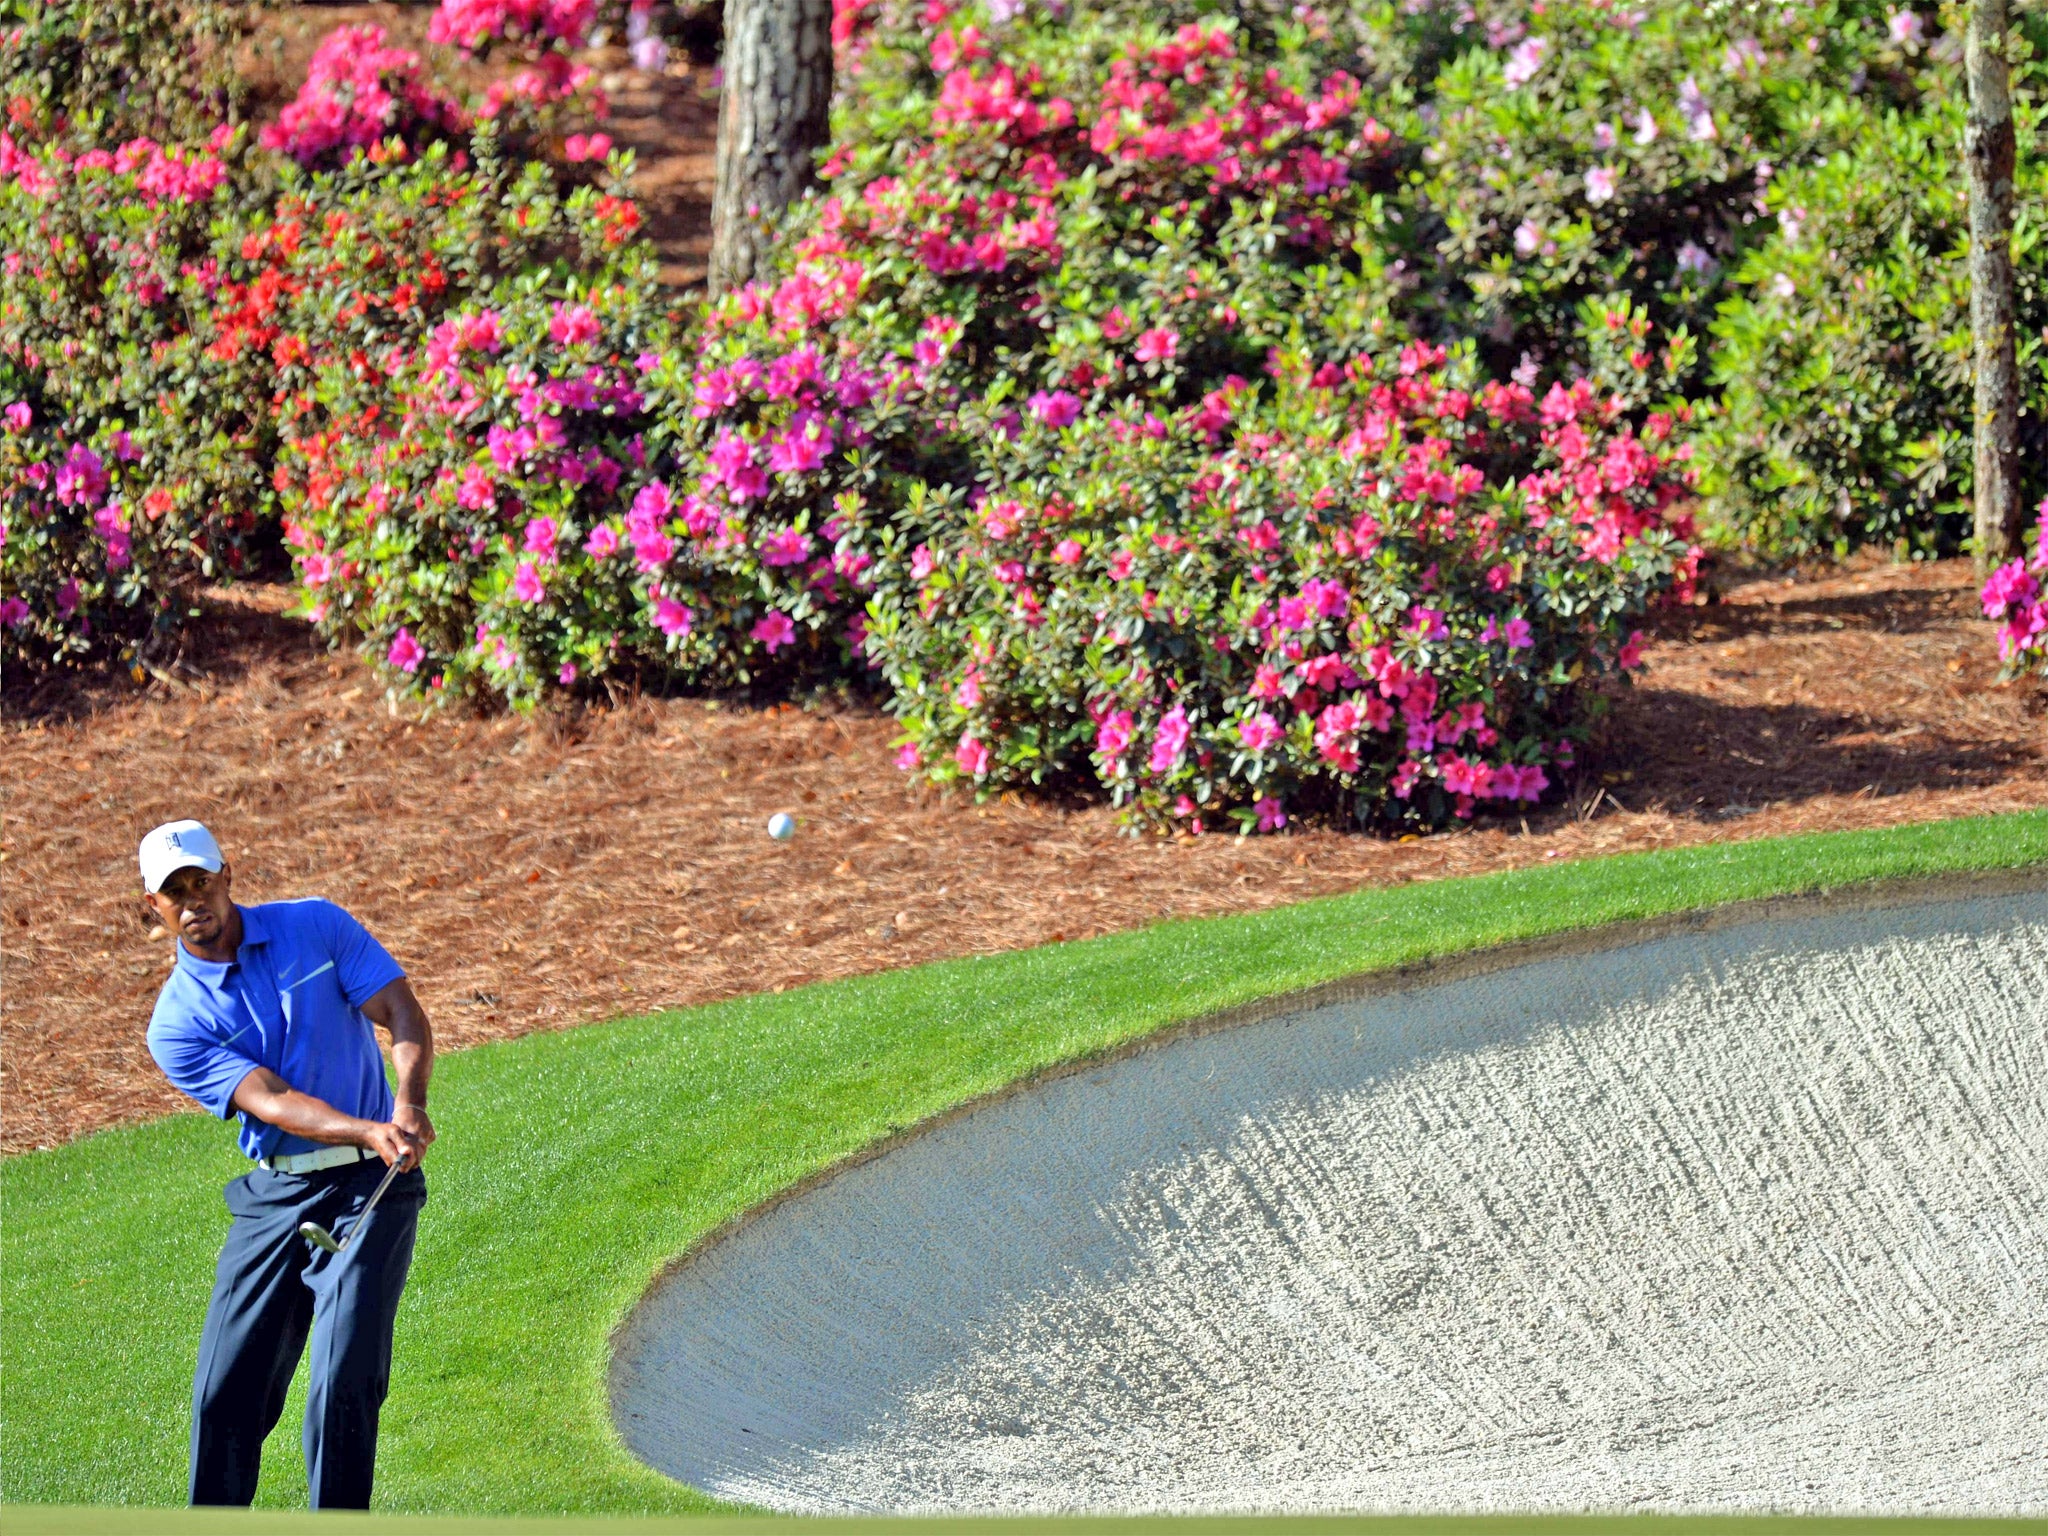 Tiger Woods during a practice round at the picturesque Augusta club on Wednesday